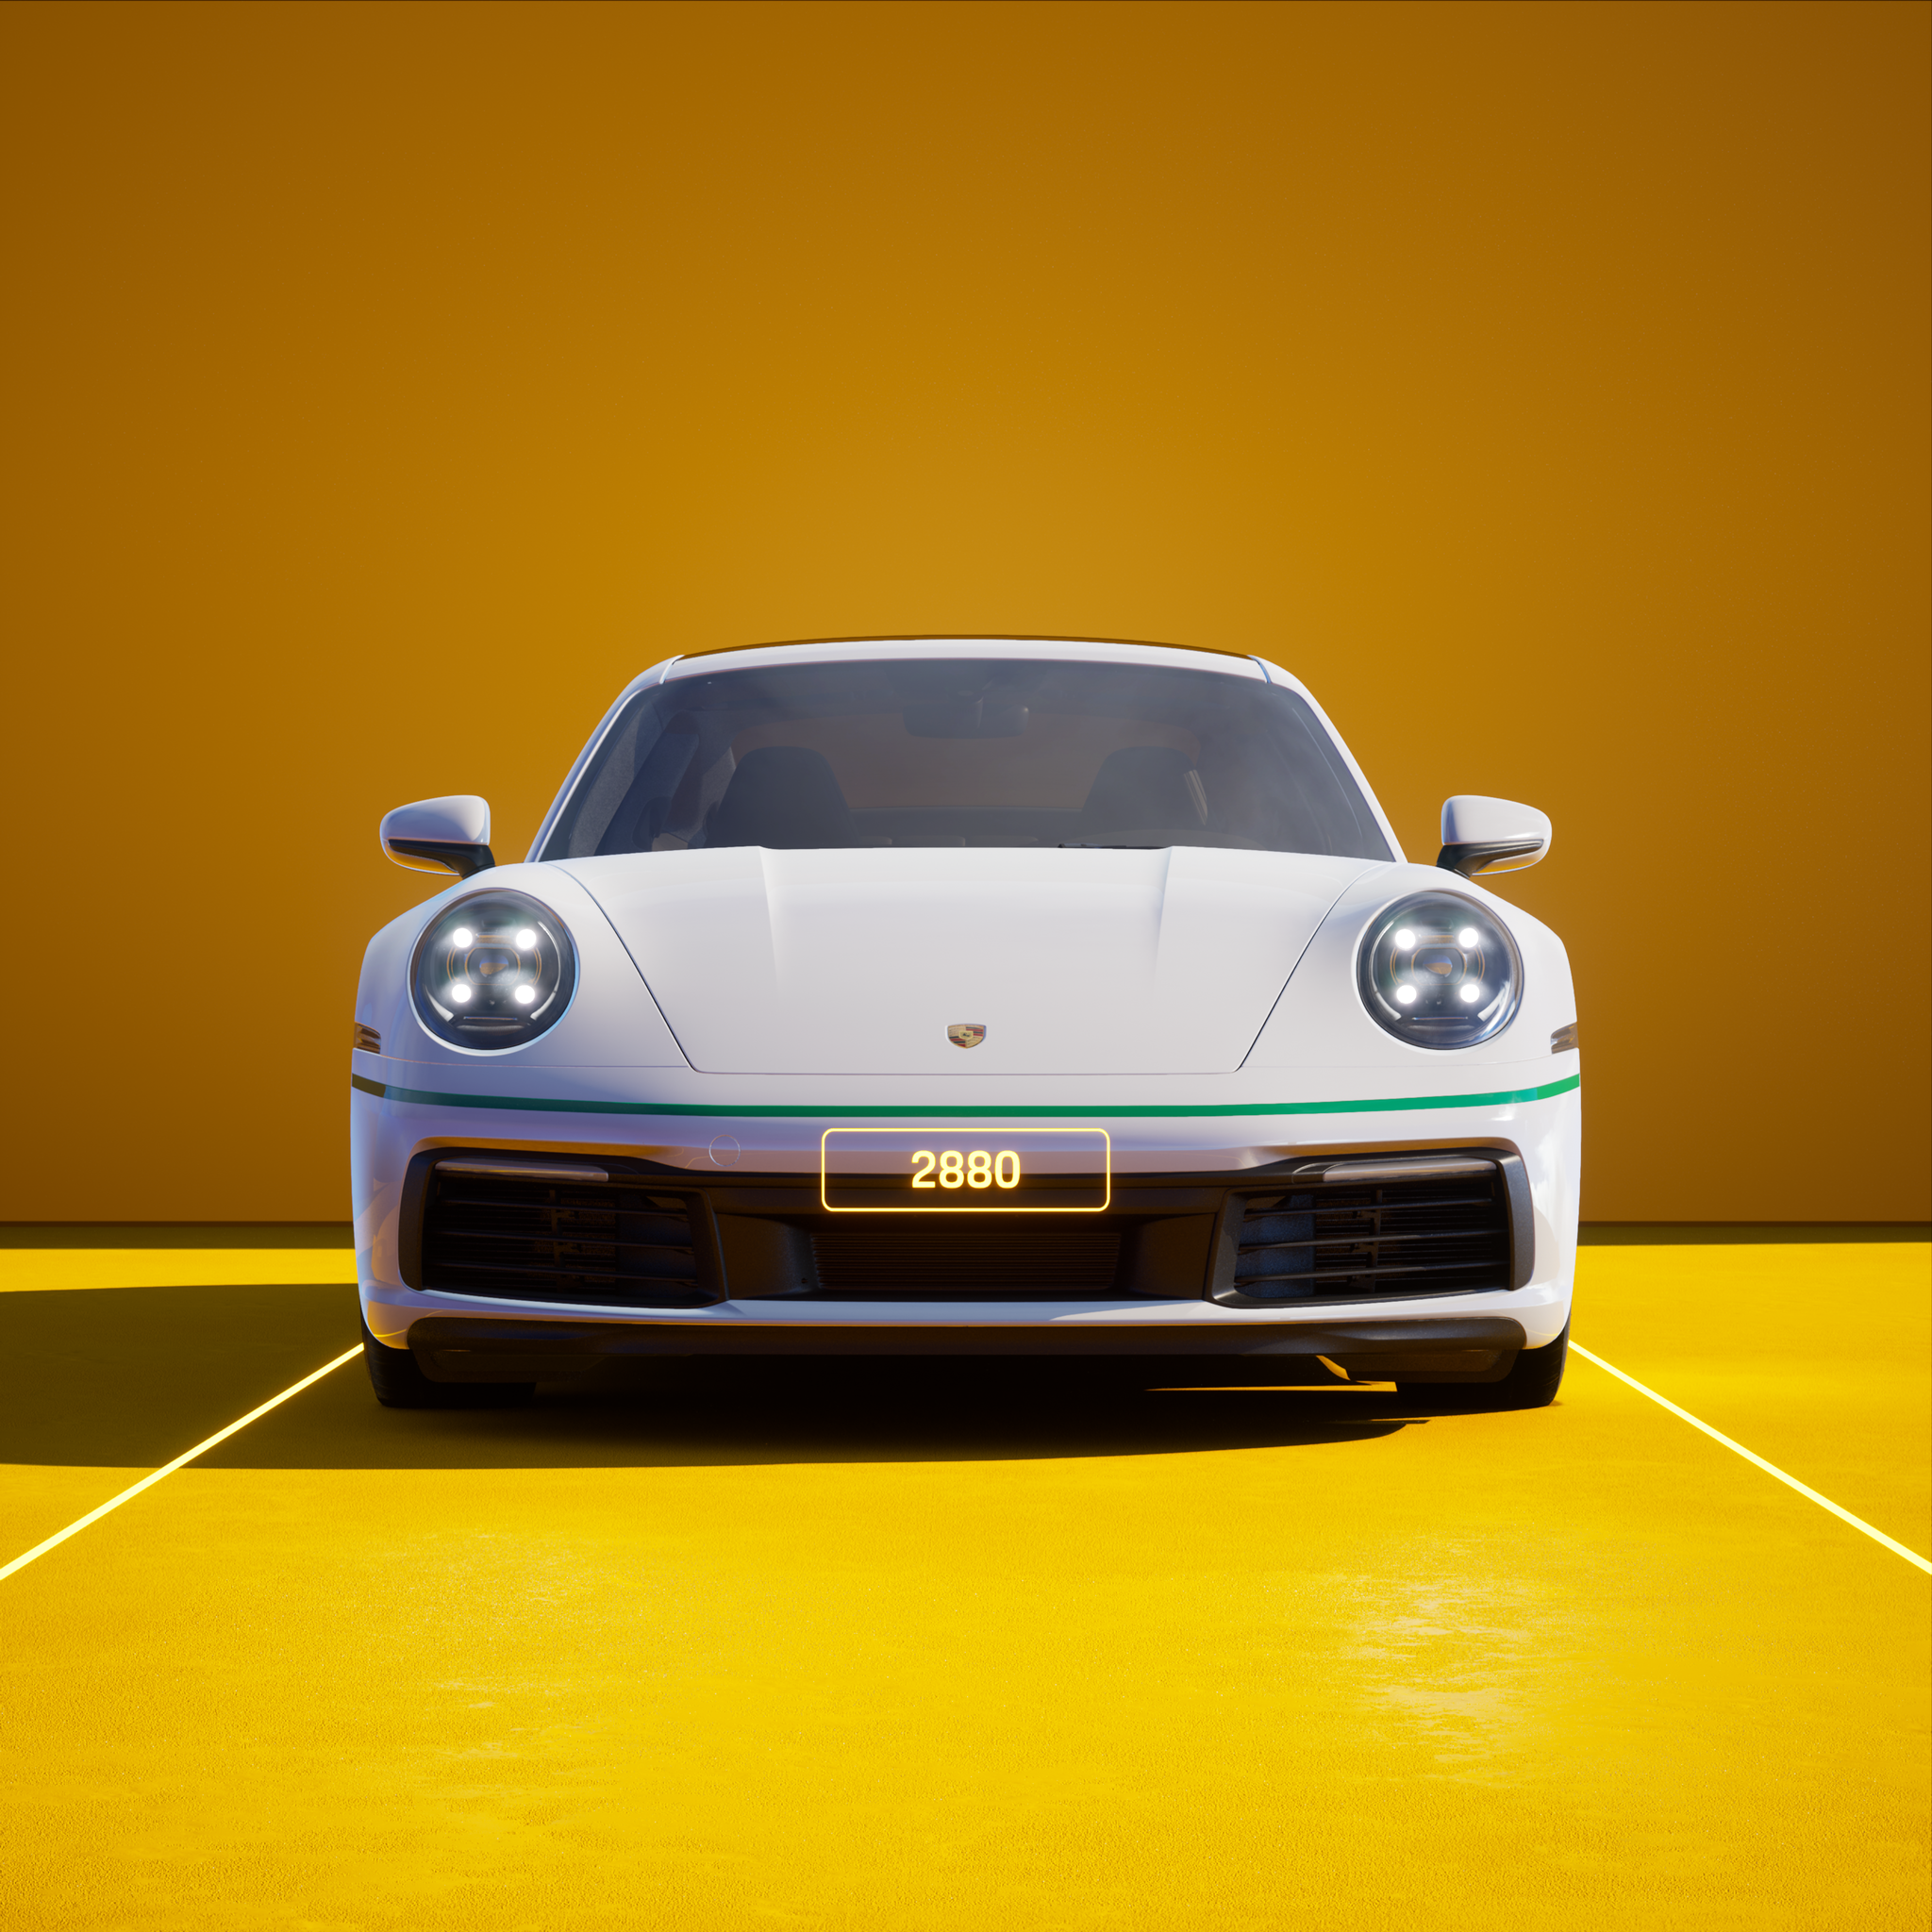 The PORSCHΞ 911 2880 image in phase